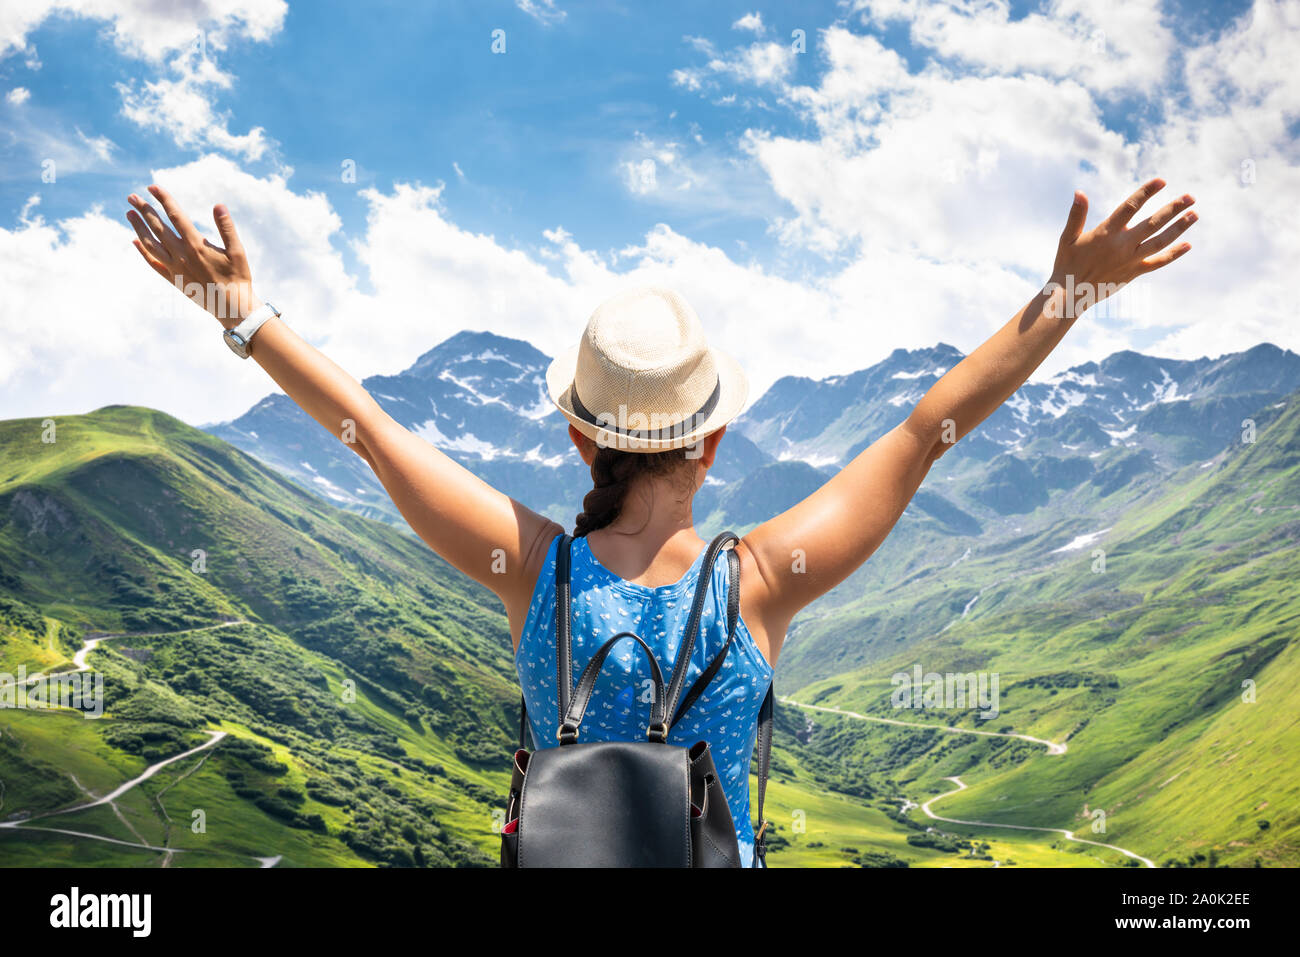 Woman With Backpack Enjoying Panoramic Mountain View Stock Photo